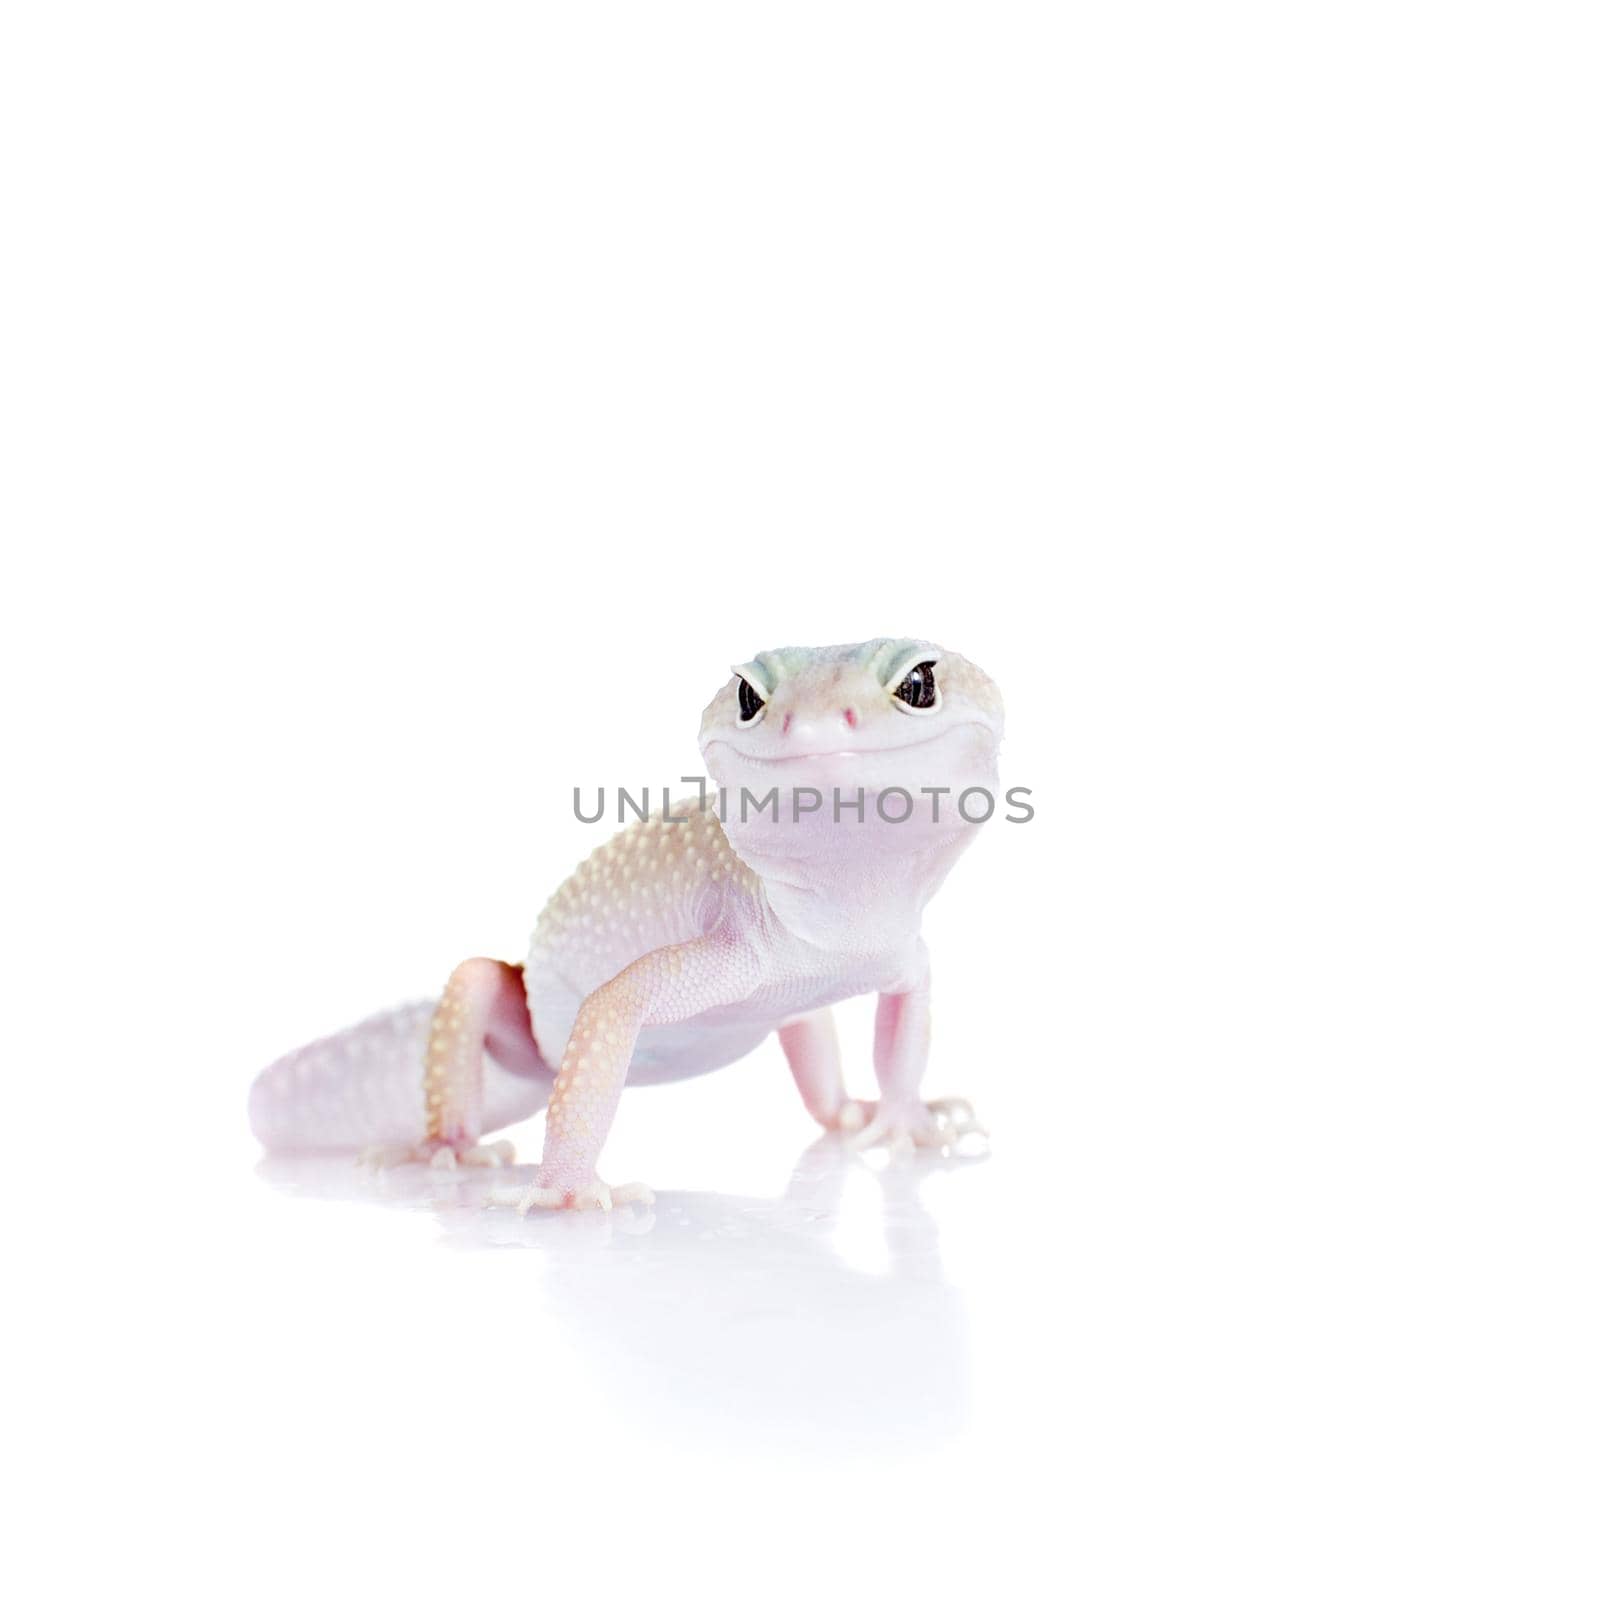 Cute Leopard Gecko on a white background by RosaJay